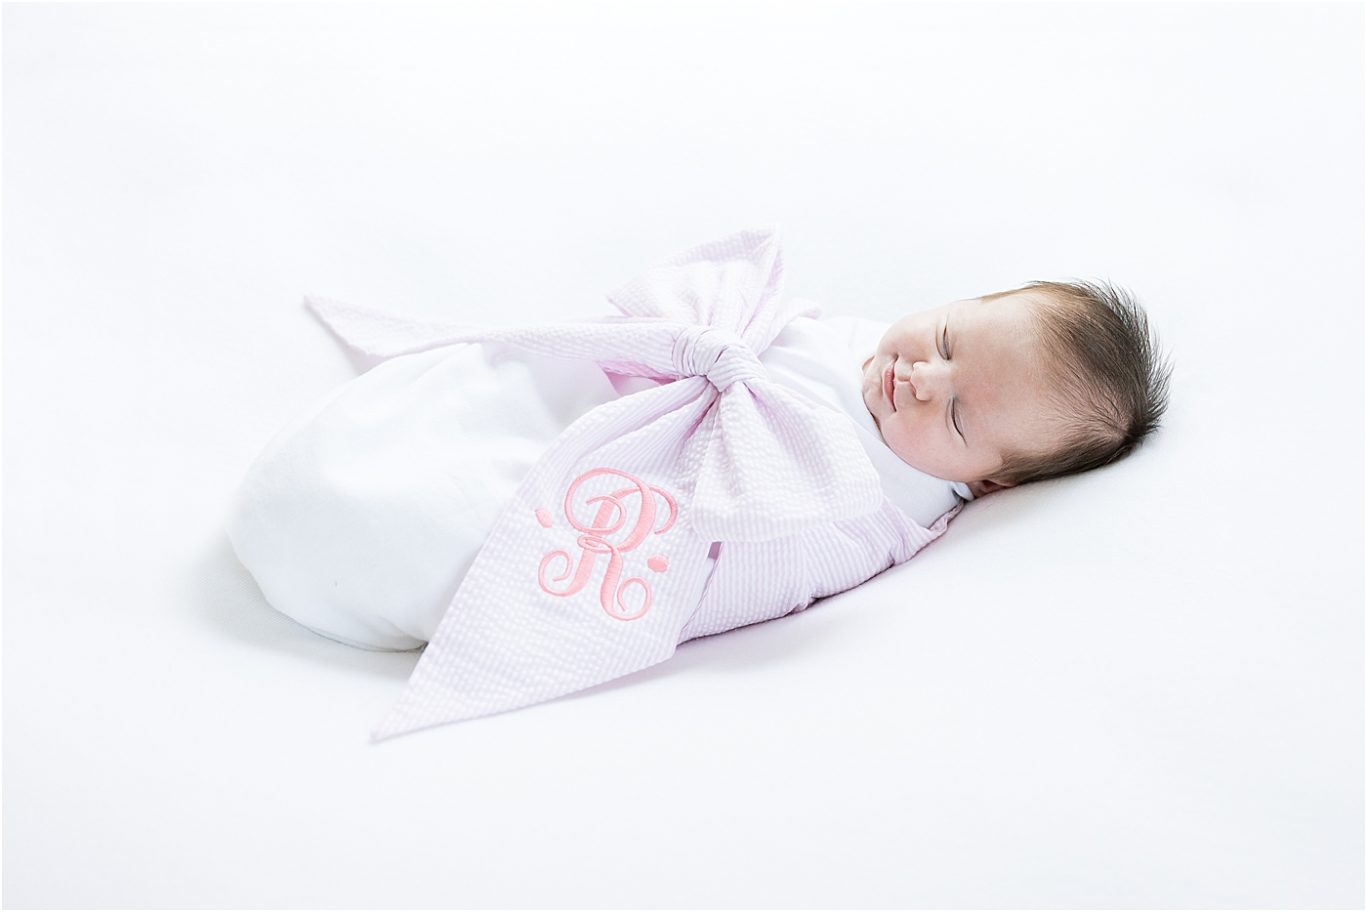 Baby girl swaddled in white with big pink bow | Lindsay Konopa Photography